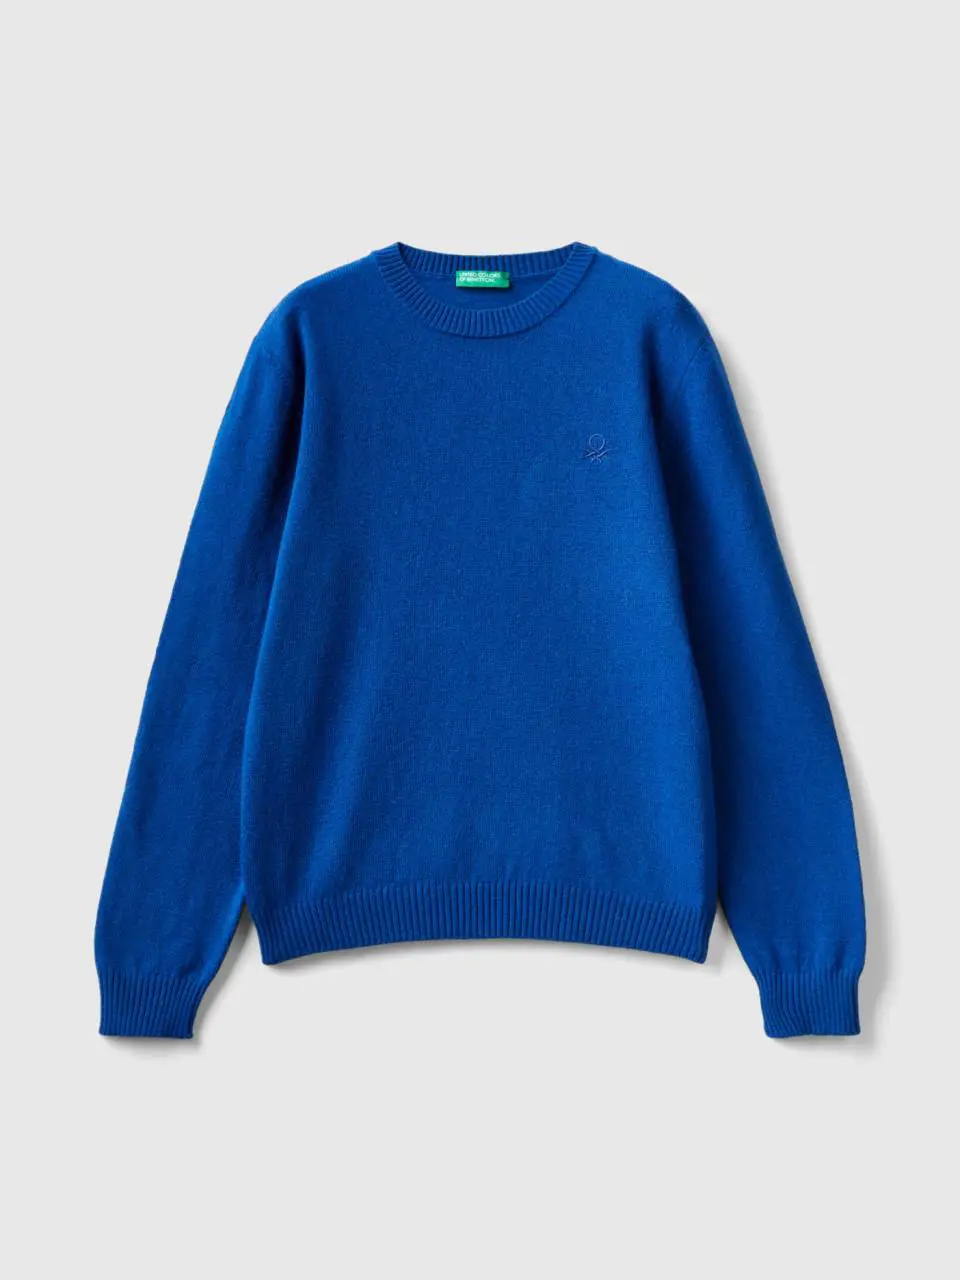 Benetton sweater in cashmere and wool blend. 1